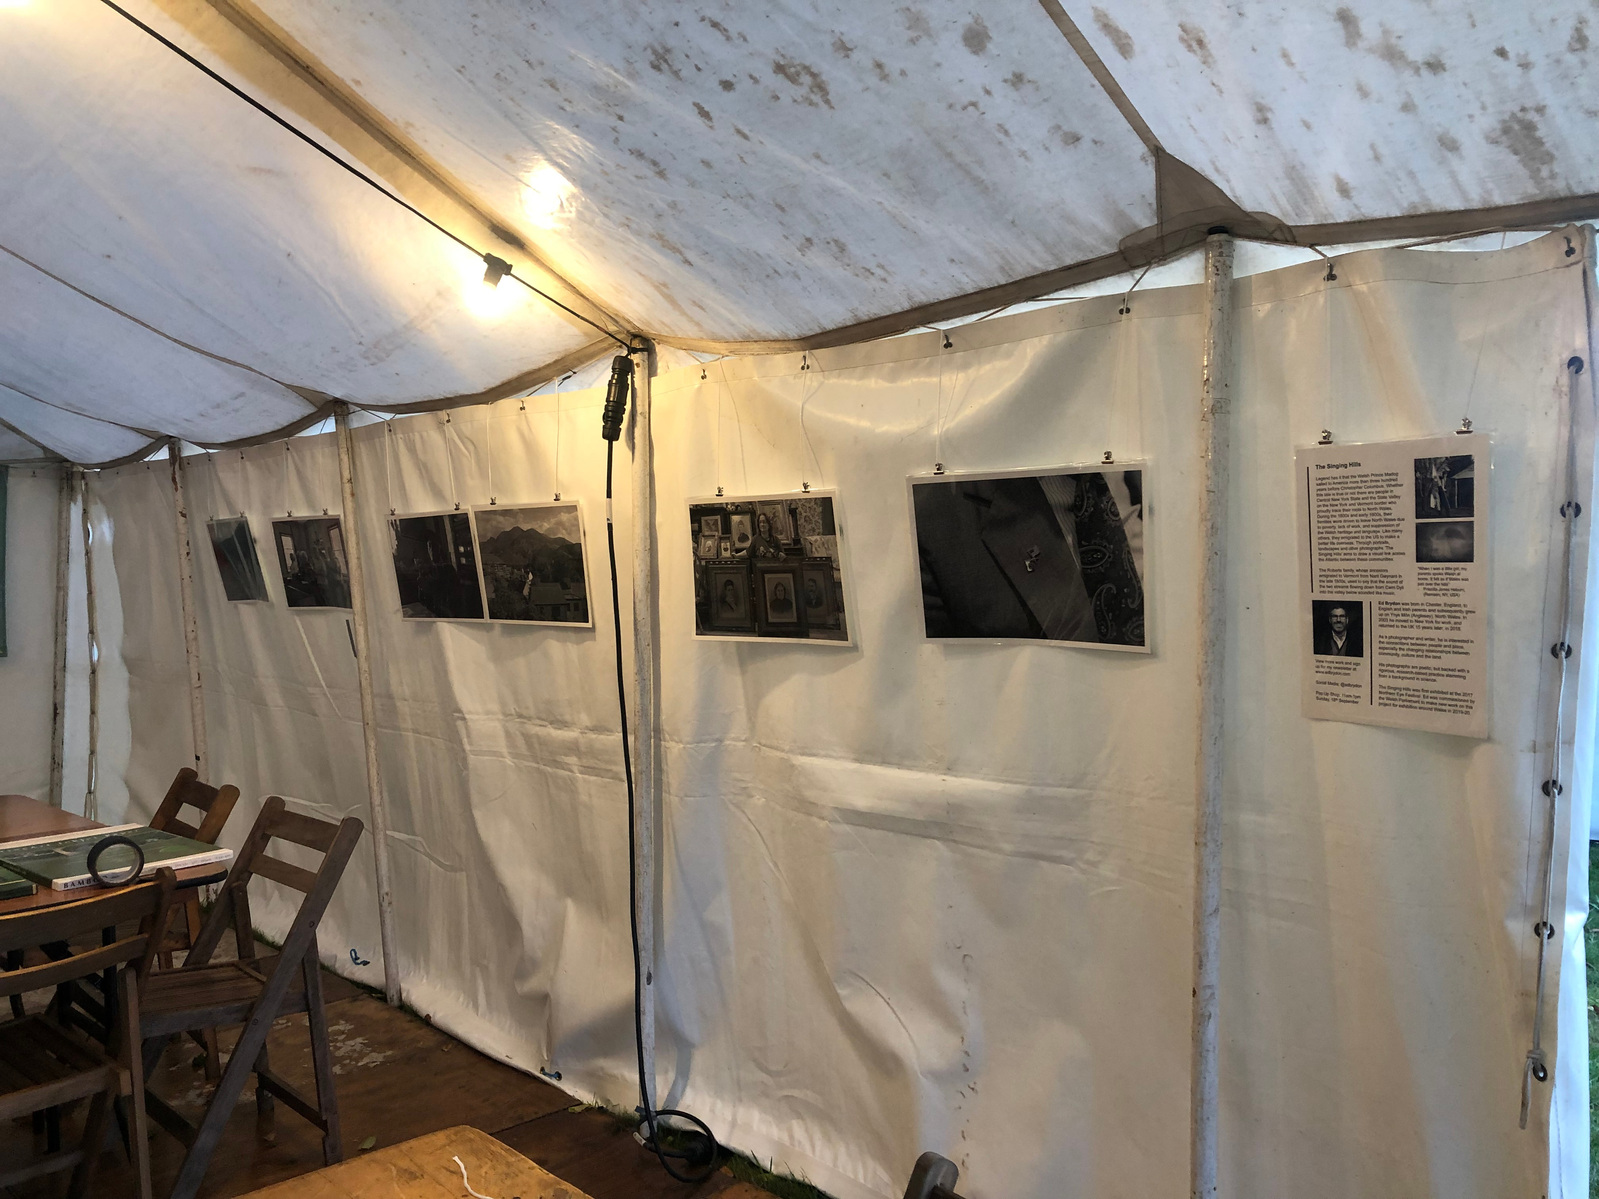 Photographic prints hanging in a marquee